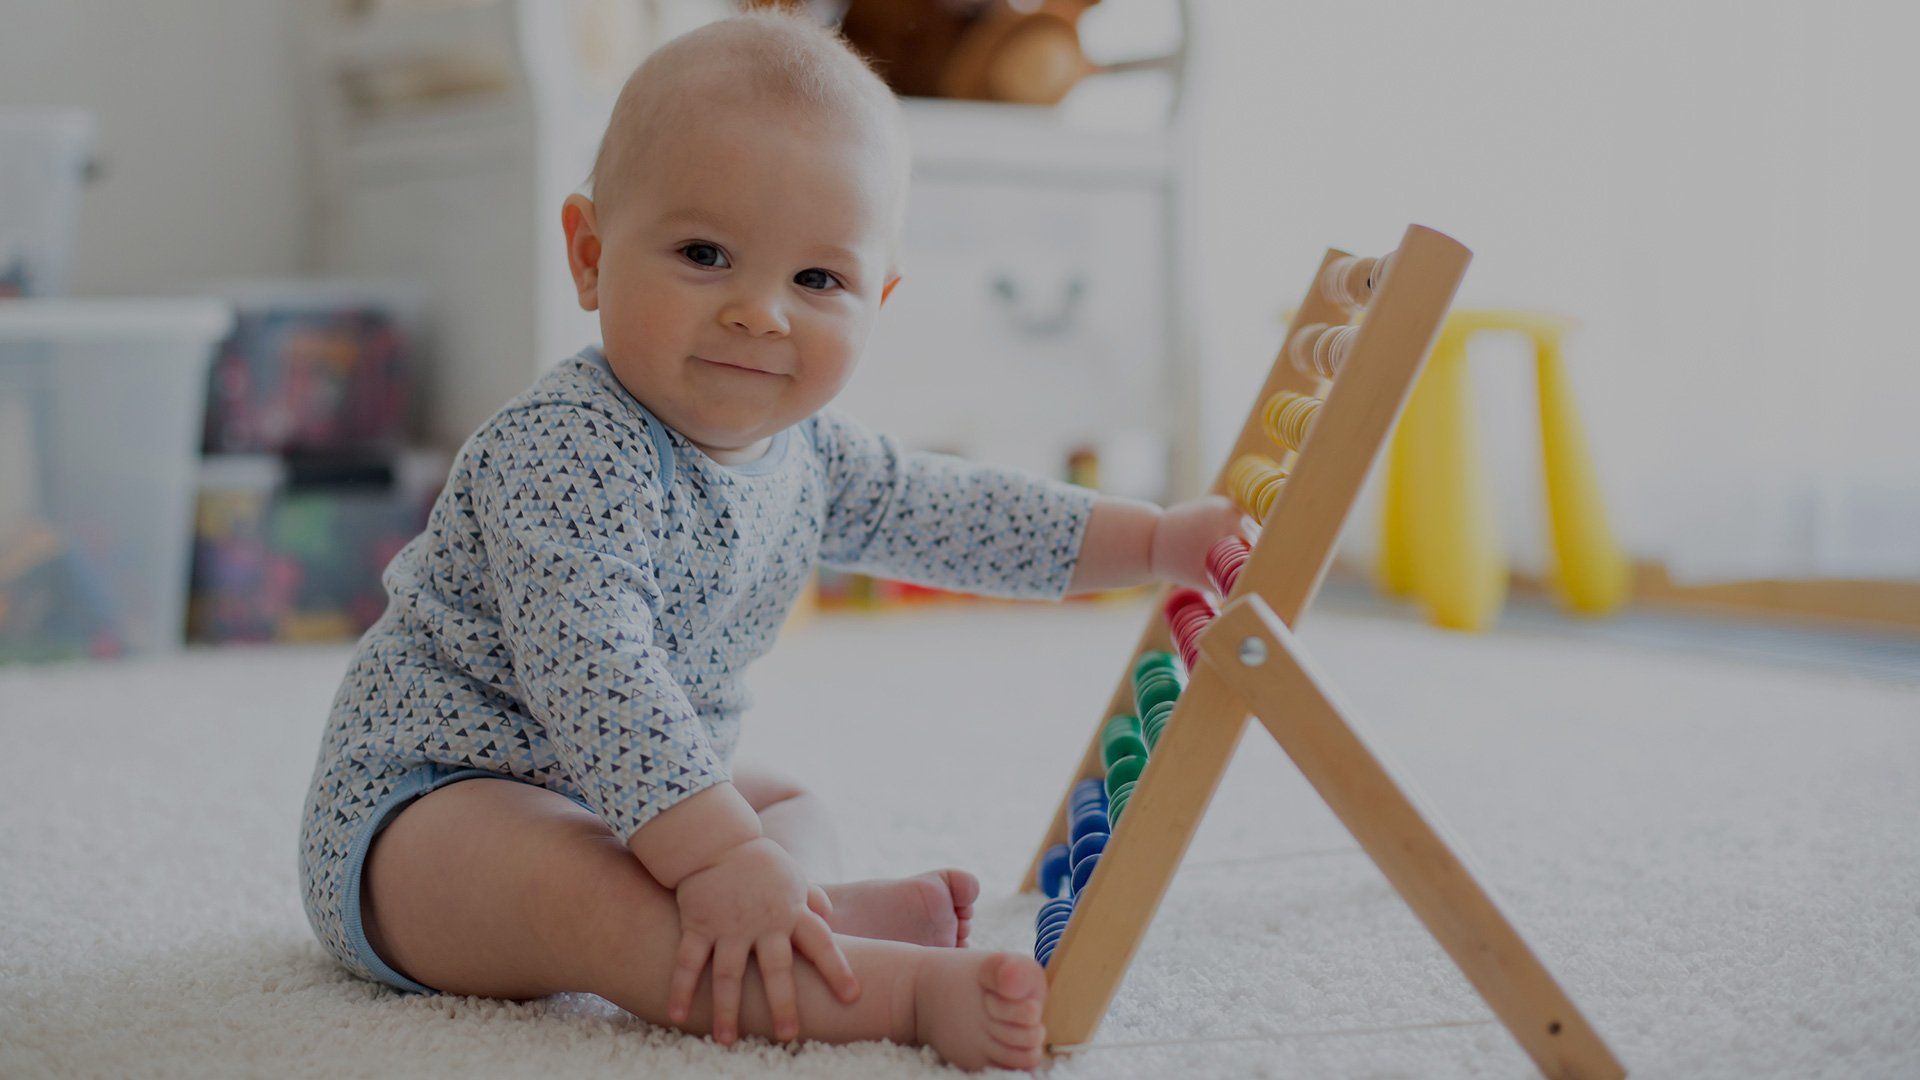 A baby sits upright, playing with coloured beads on an abacus.